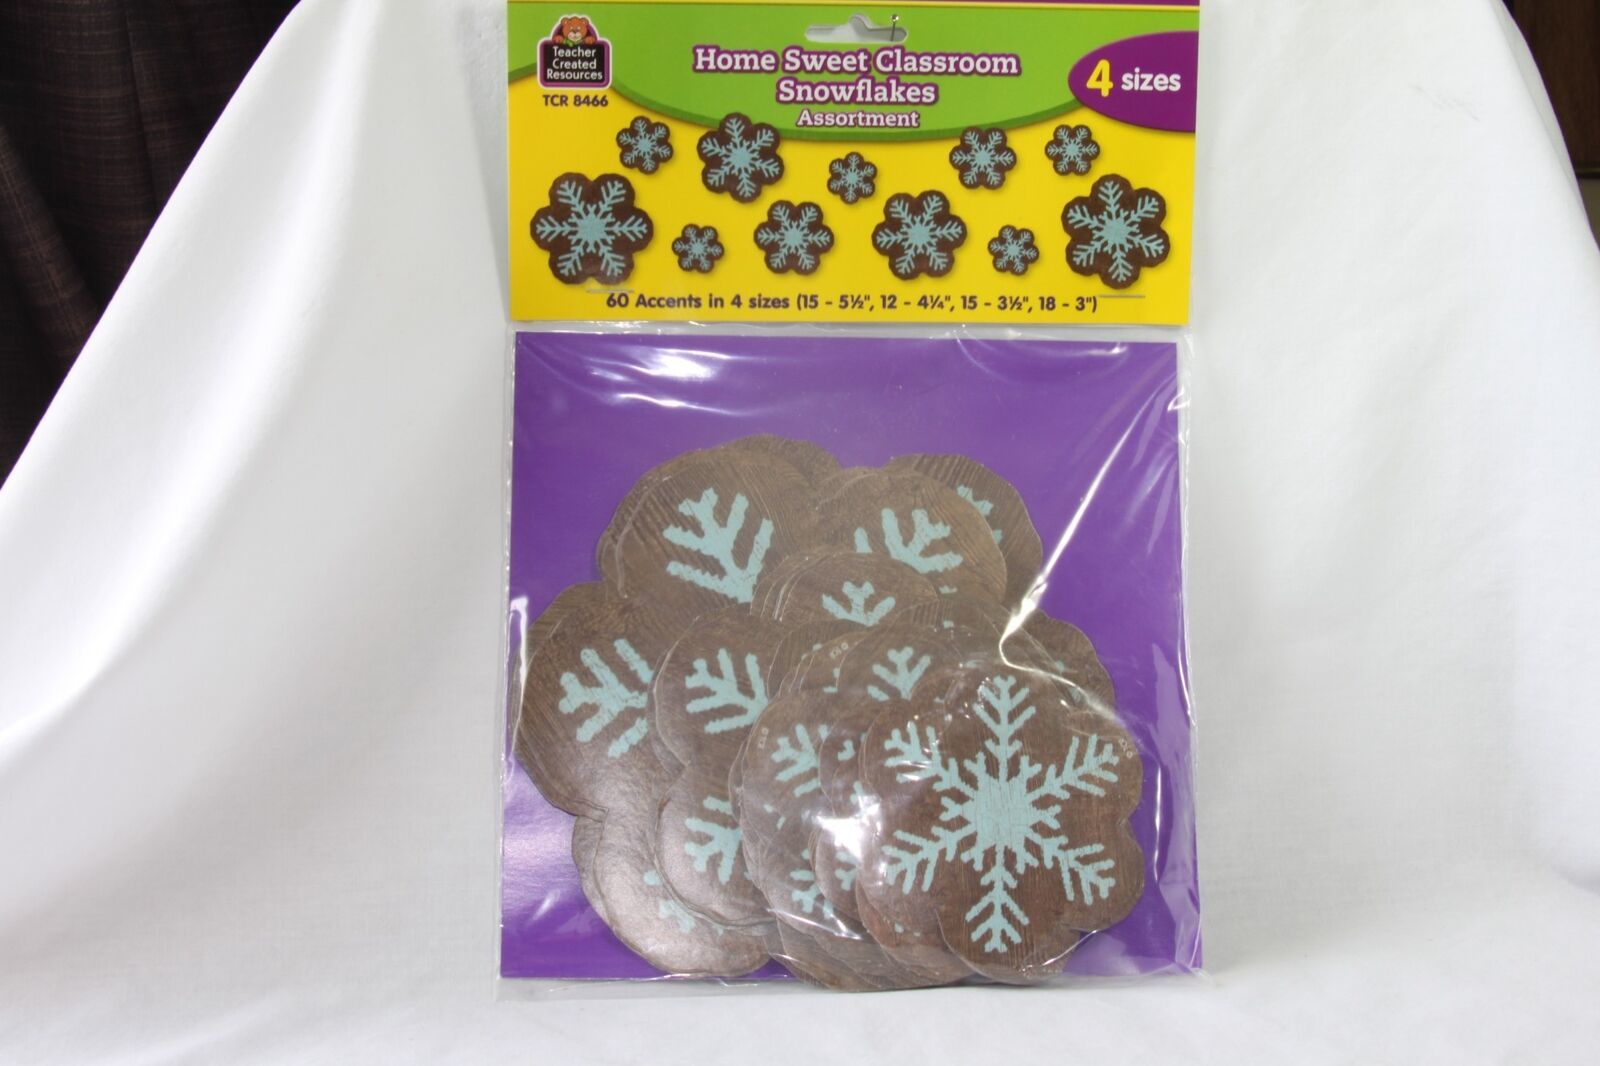 Primary image for Teacher Crate (new) HOME SWEET CLASSROOM SNOWFLAKES - 60 ACCENTS IN 4 SIZES